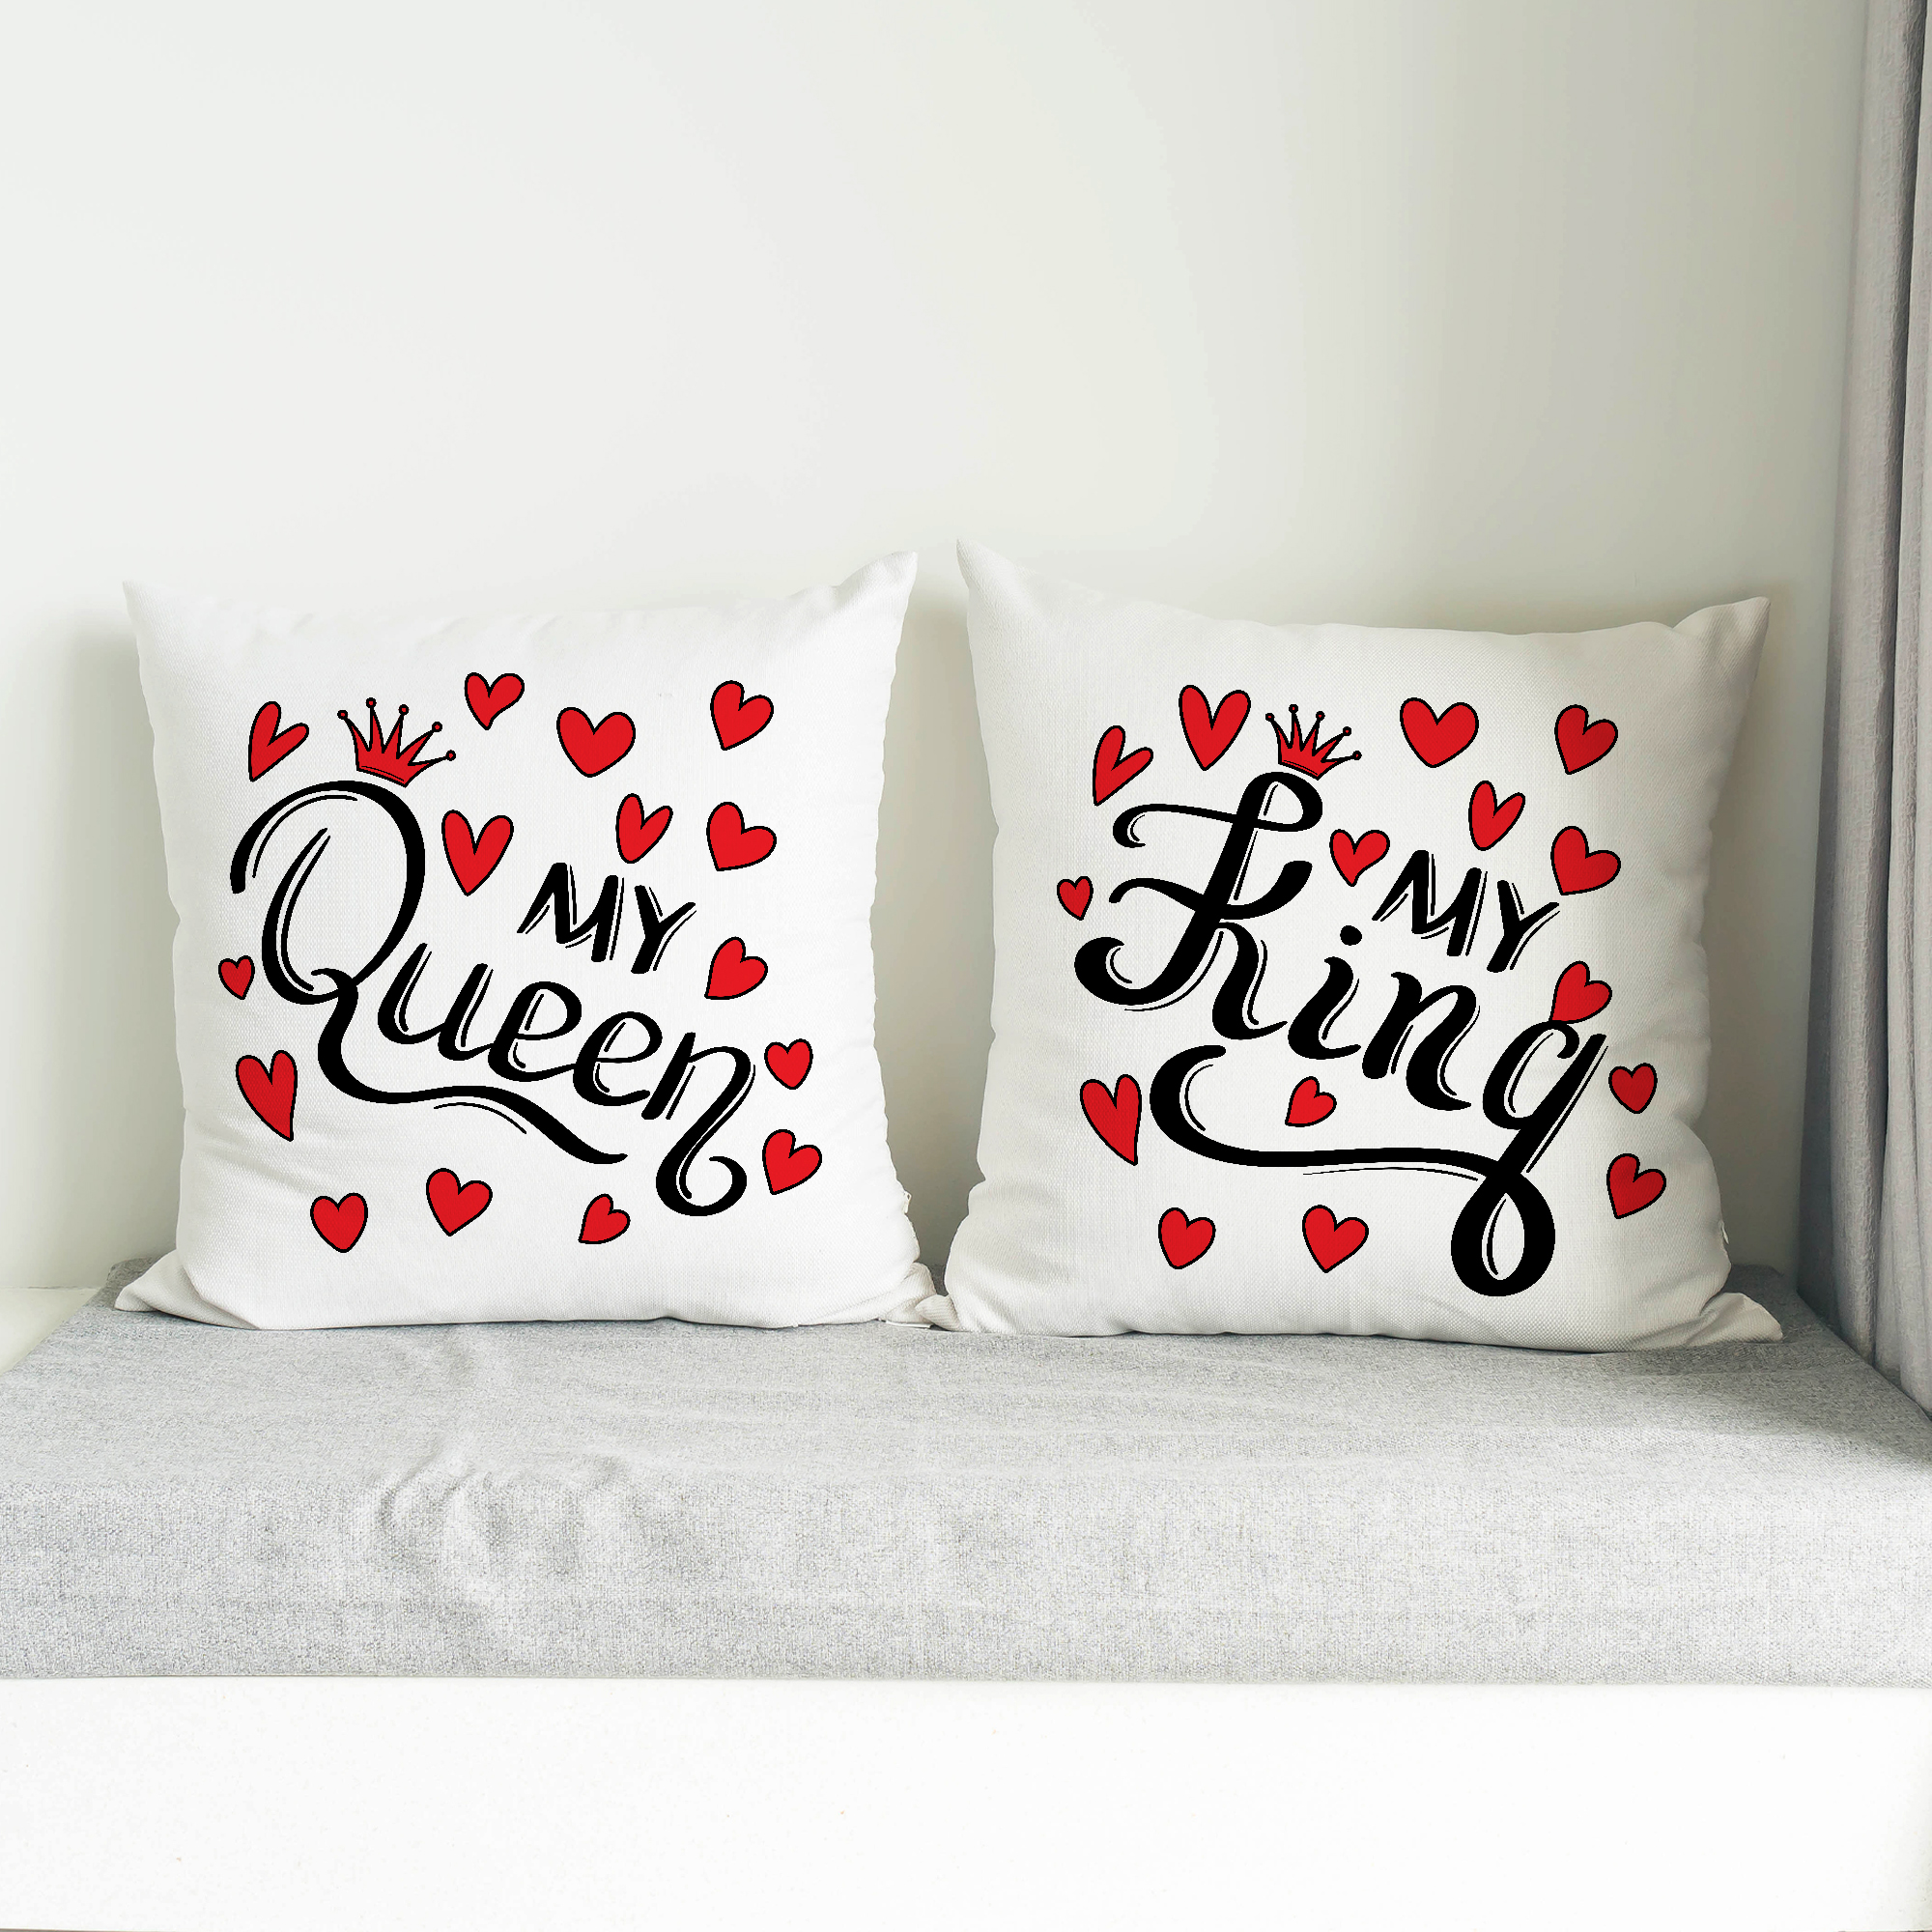 Beautiful pillow on sofa decoration in living room